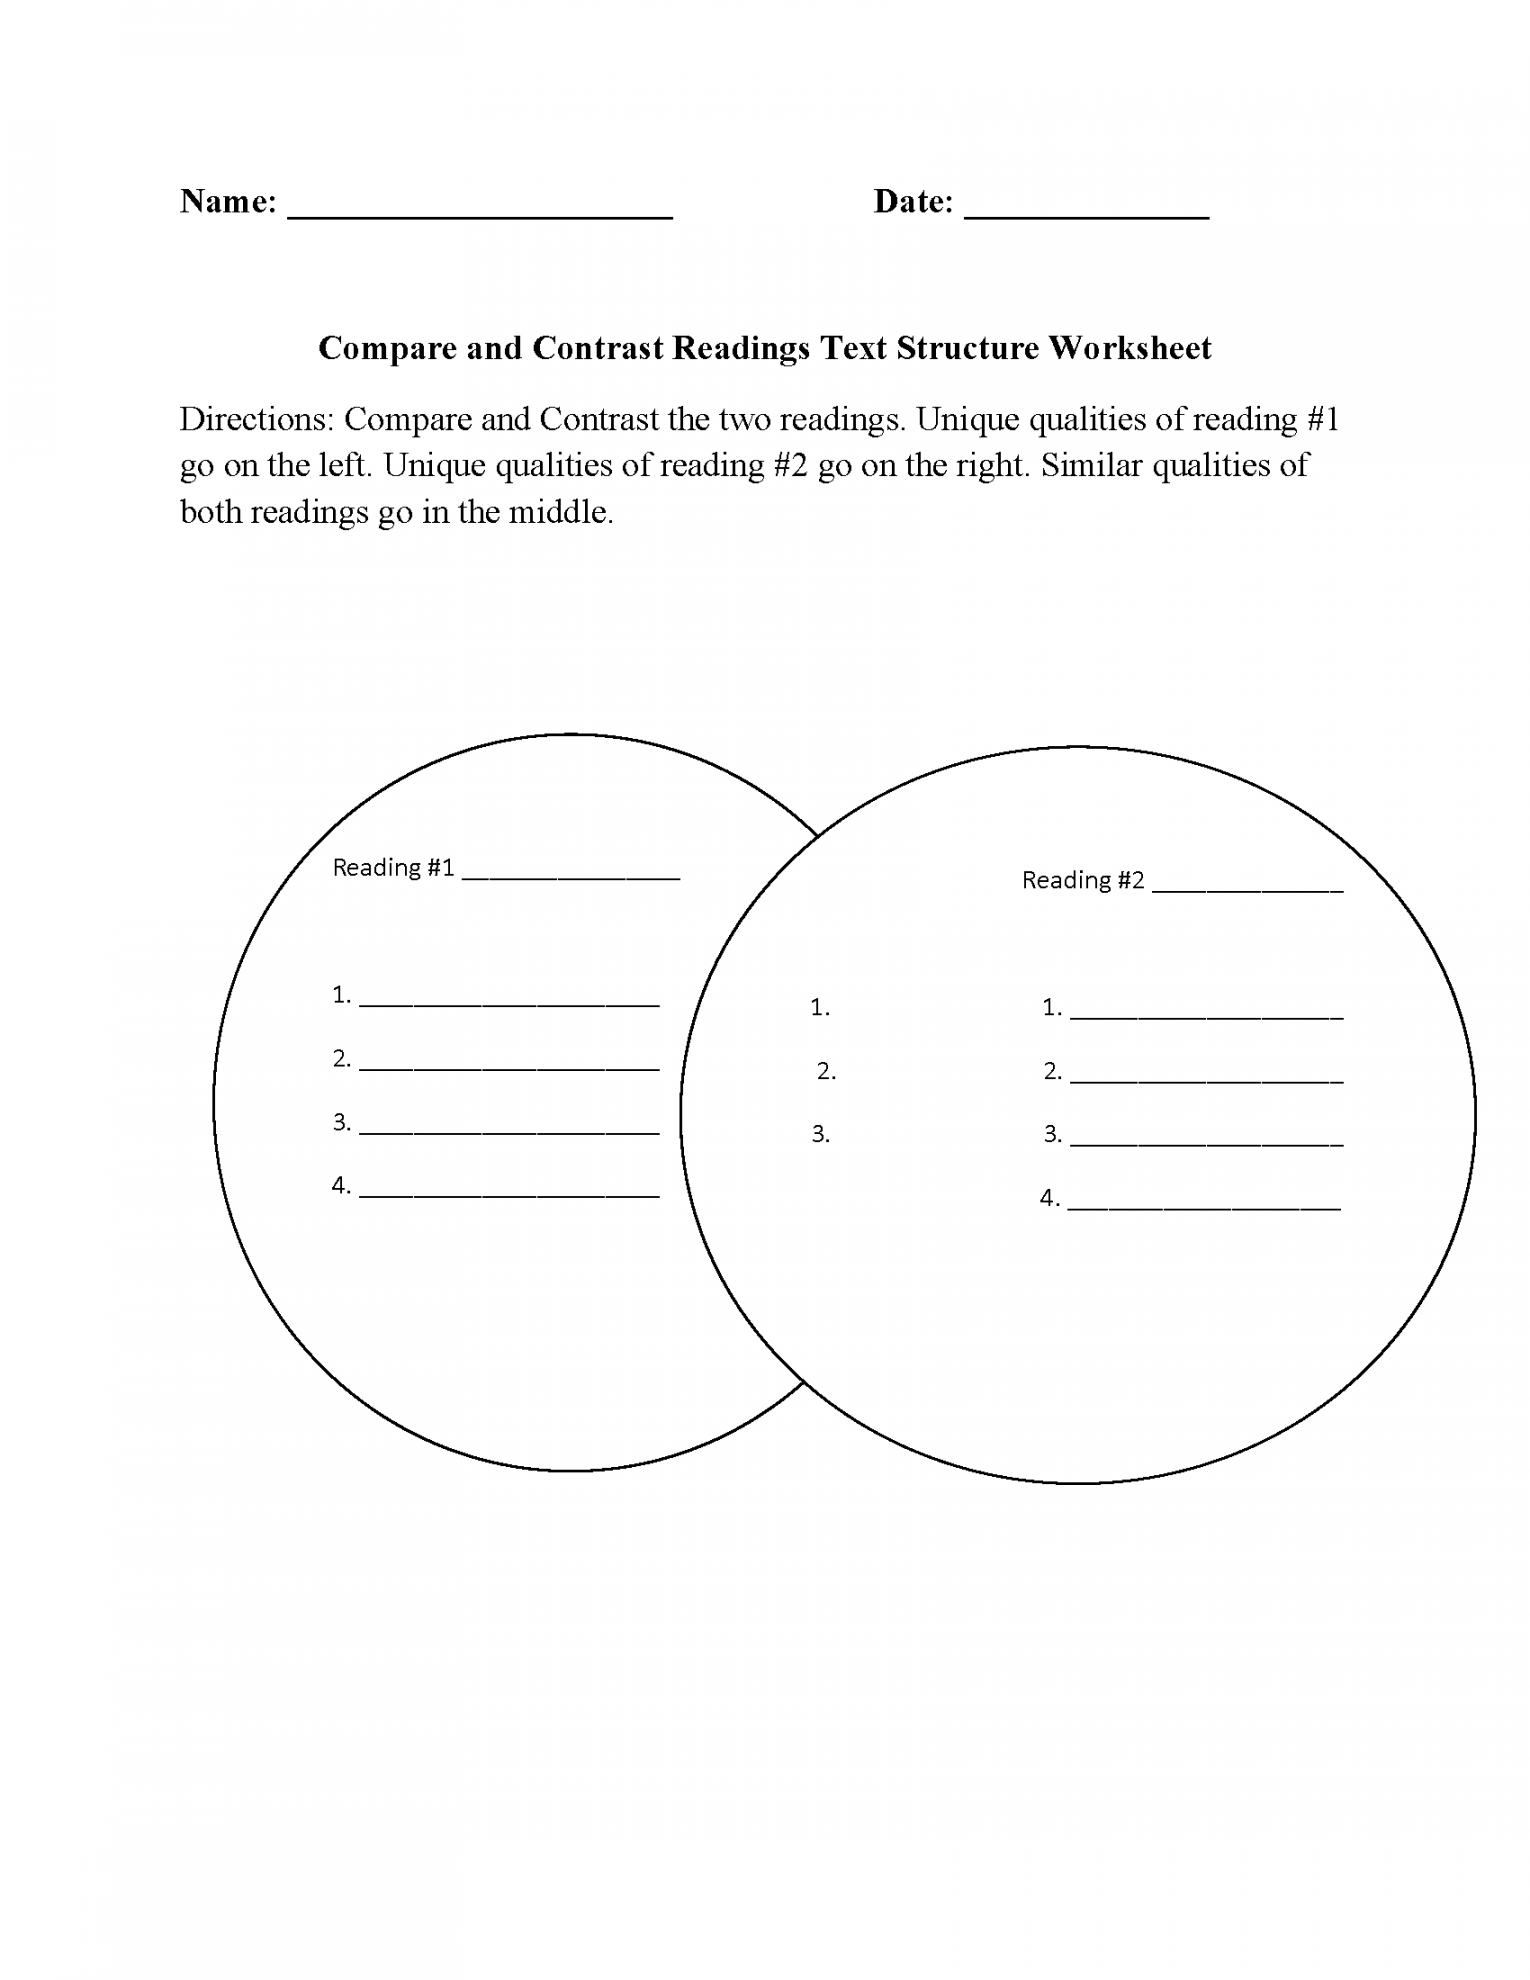 text structure worksheets compare and contrast readings